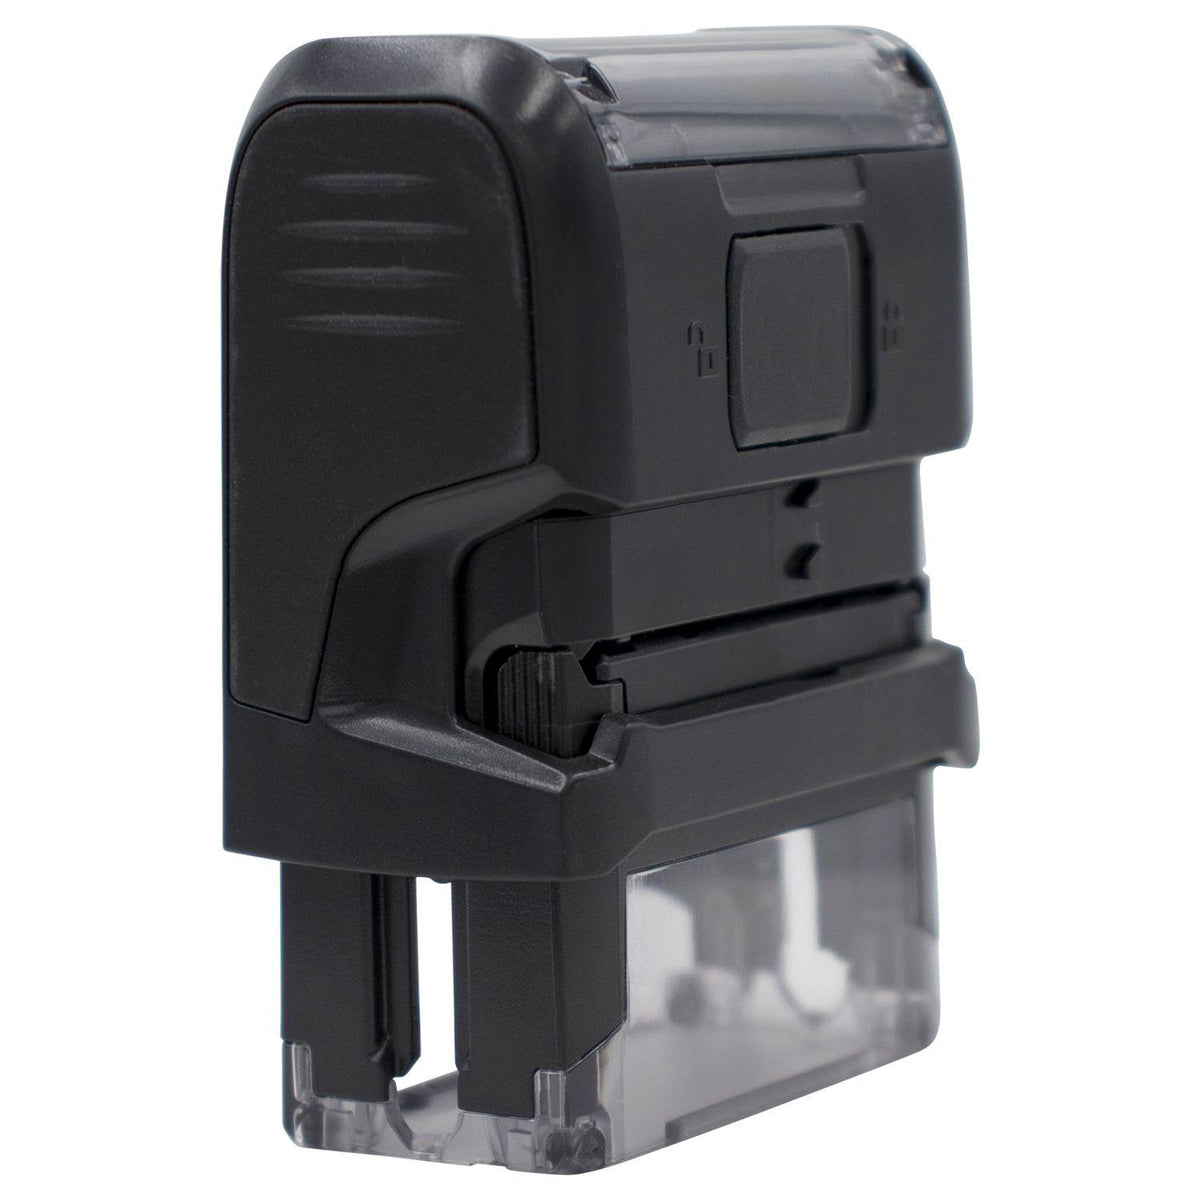 Self-Inking Shadow Copy Stamp - Engineer Seal Stamps - Brand_Trodat, Impression Size_Small, Stamp Type_Self-Inking Stamp, Type of Use_General, Type of Use_Office